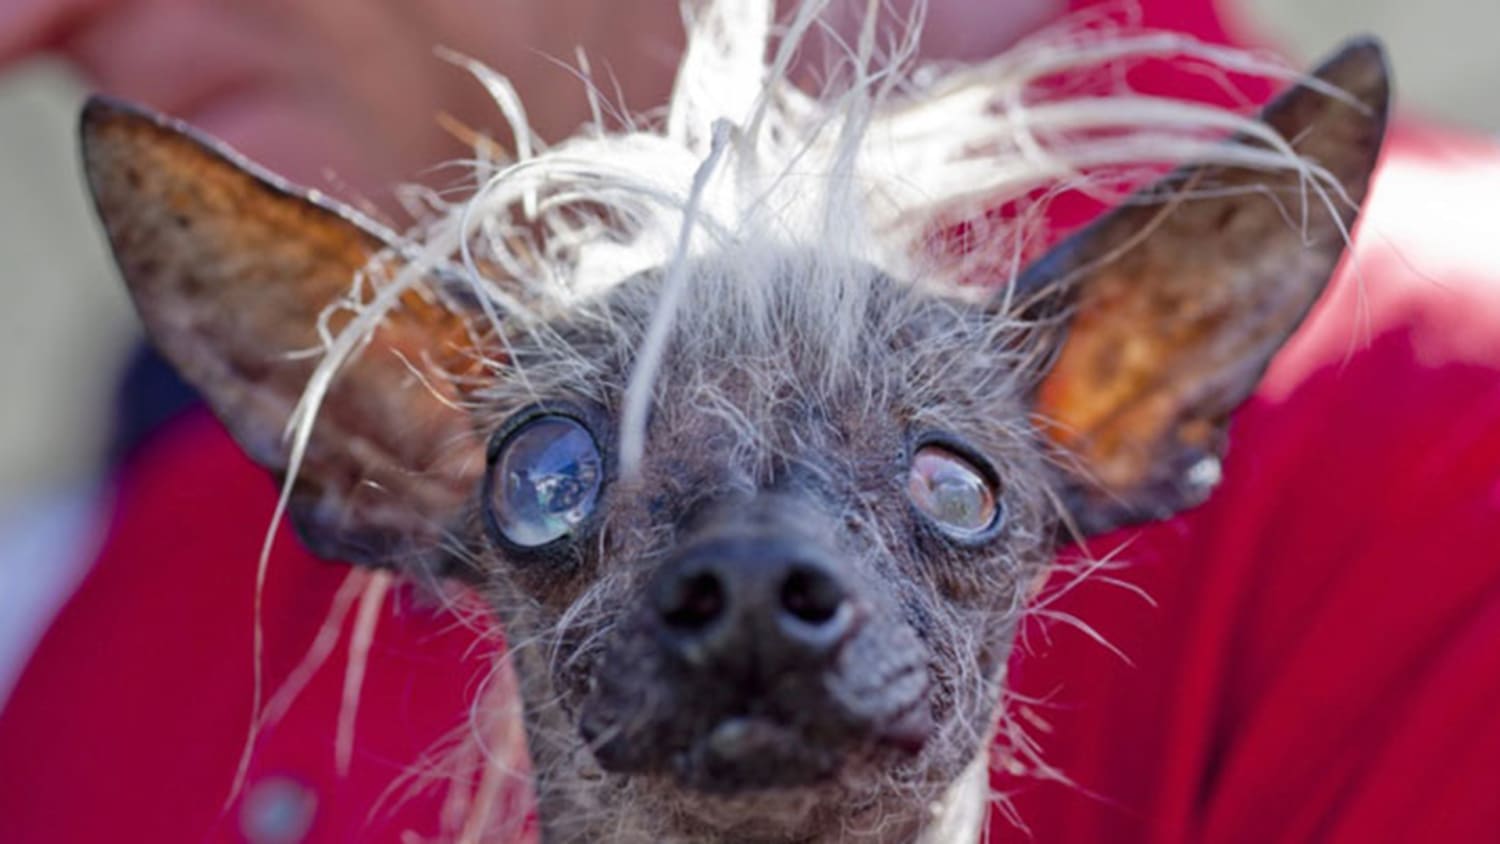 World's Ugliest Dog: See 6 of the canine competitors